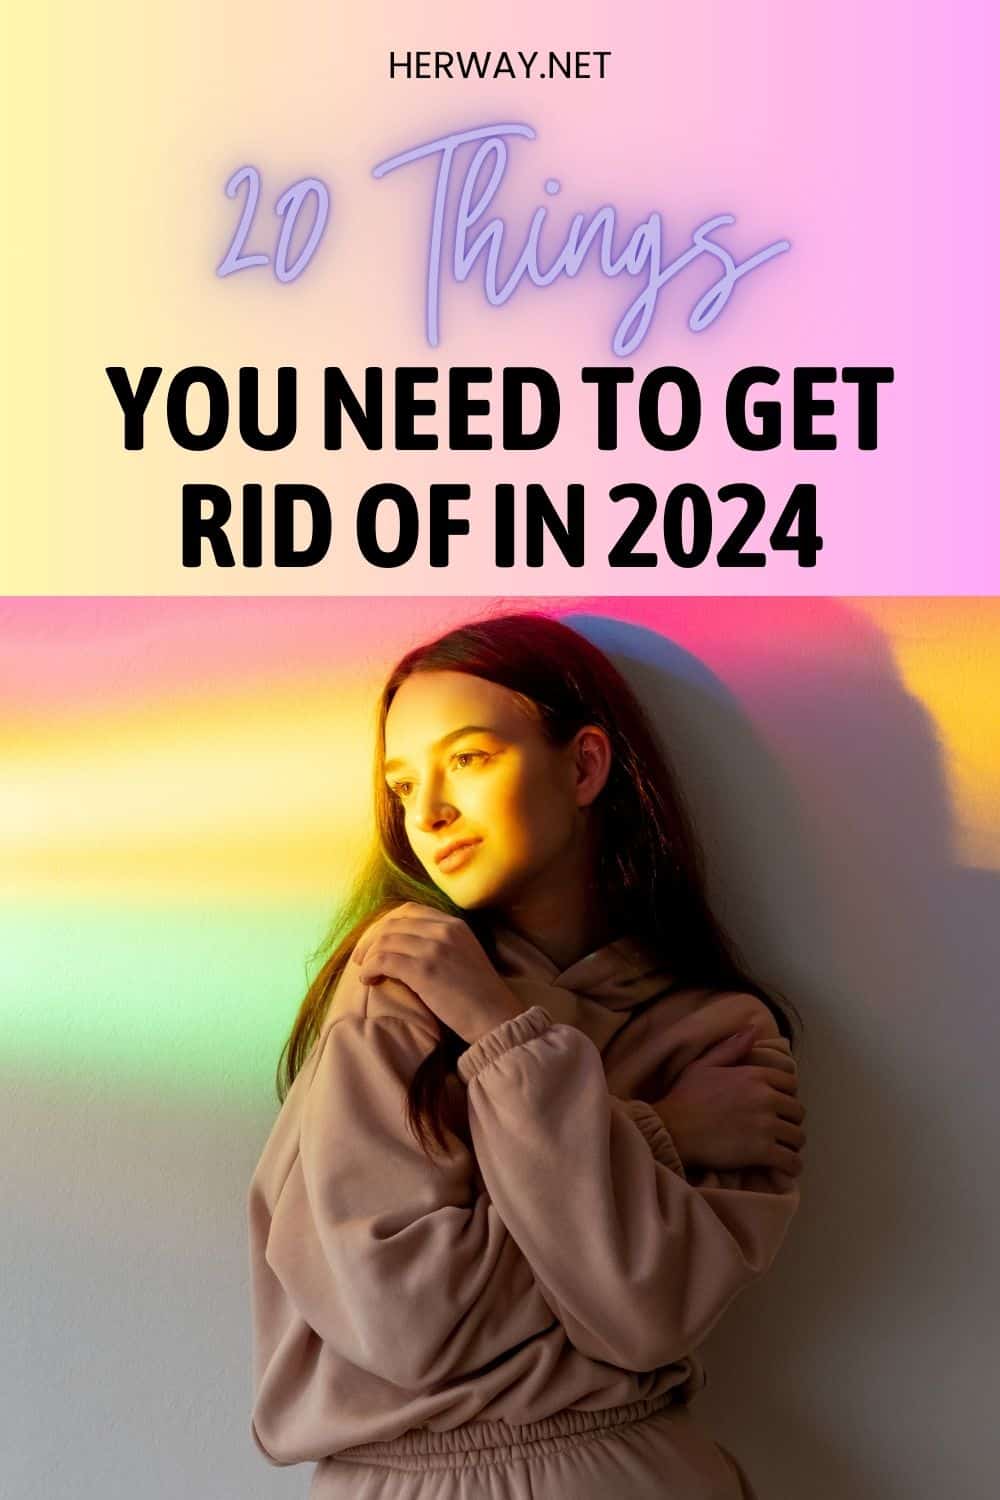 20 Things You Need To Get Rid Of In 2024